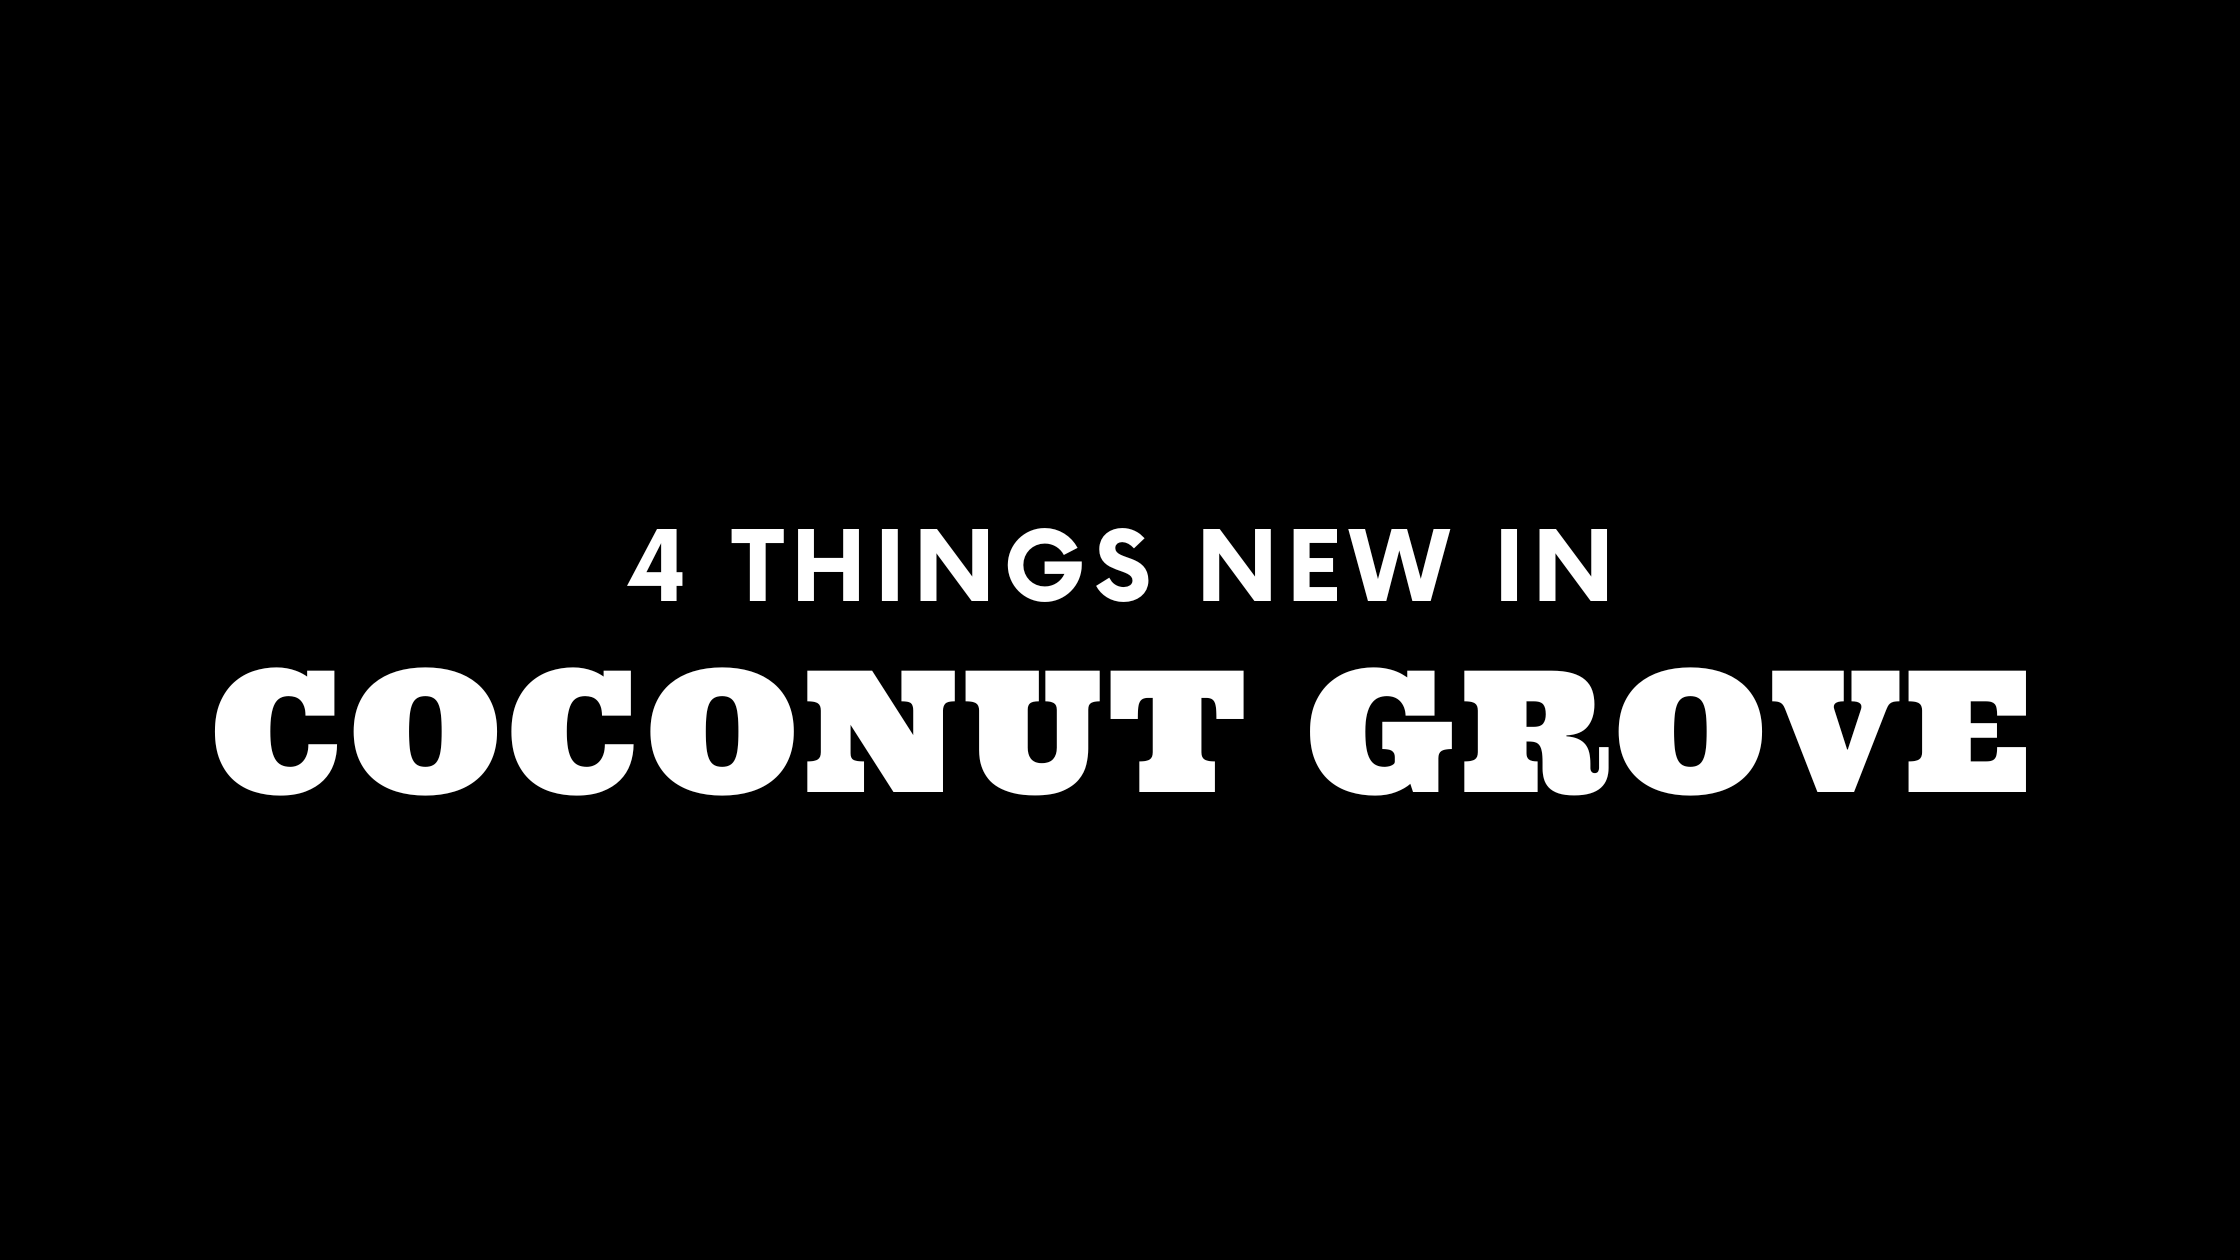 4 Things New in Coconut Grove!